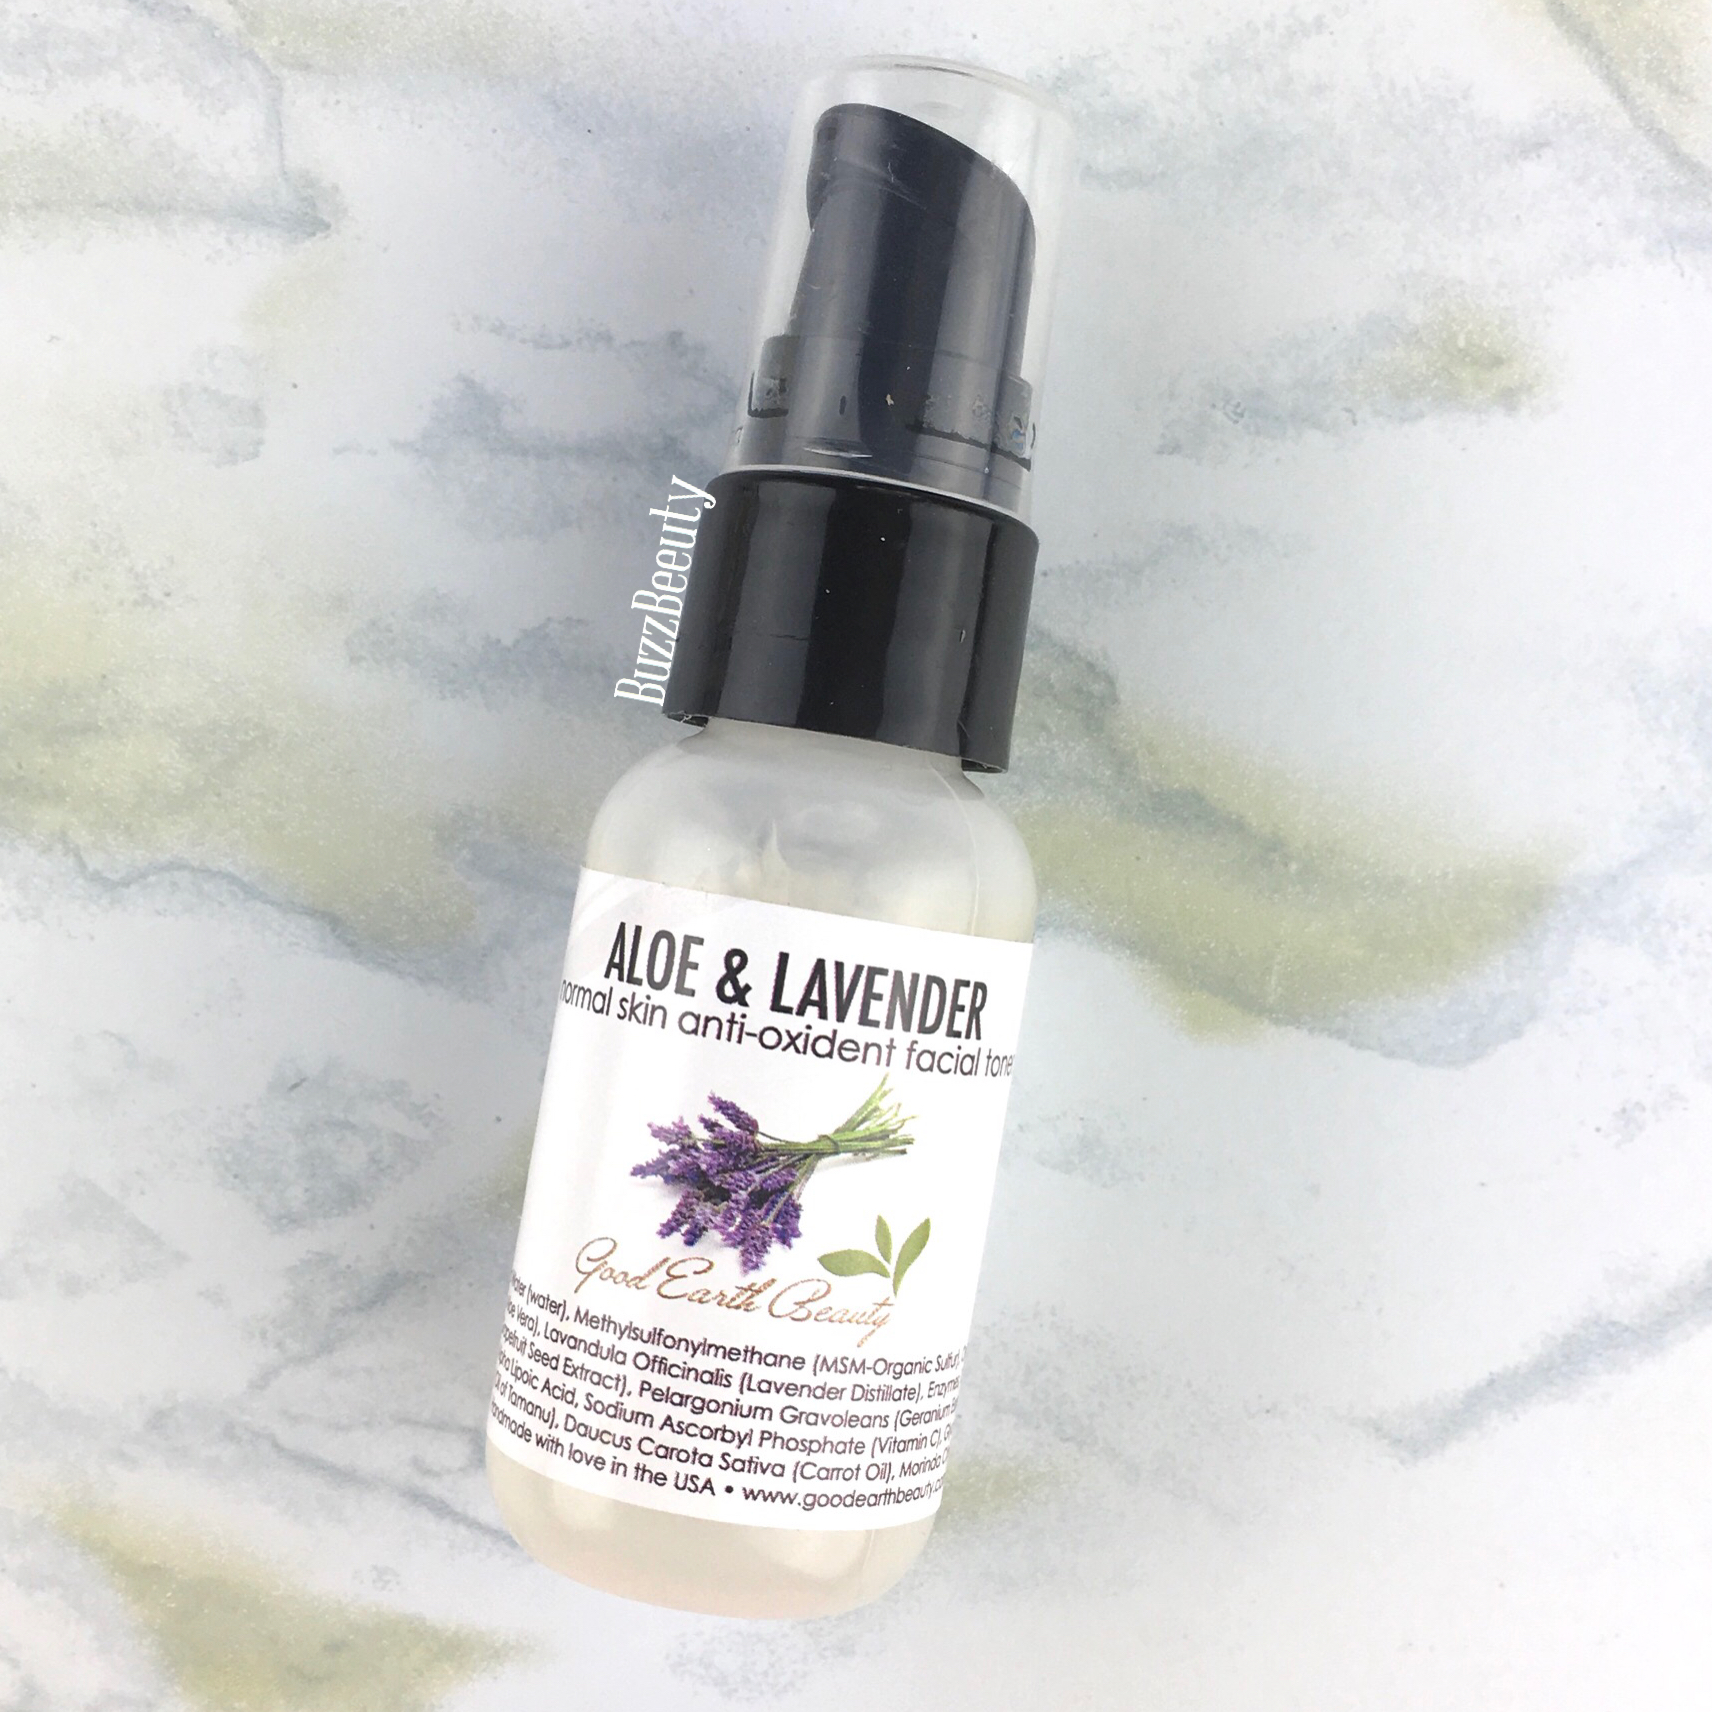 Good Earth Beauty Aloe and Lavender Toner Review